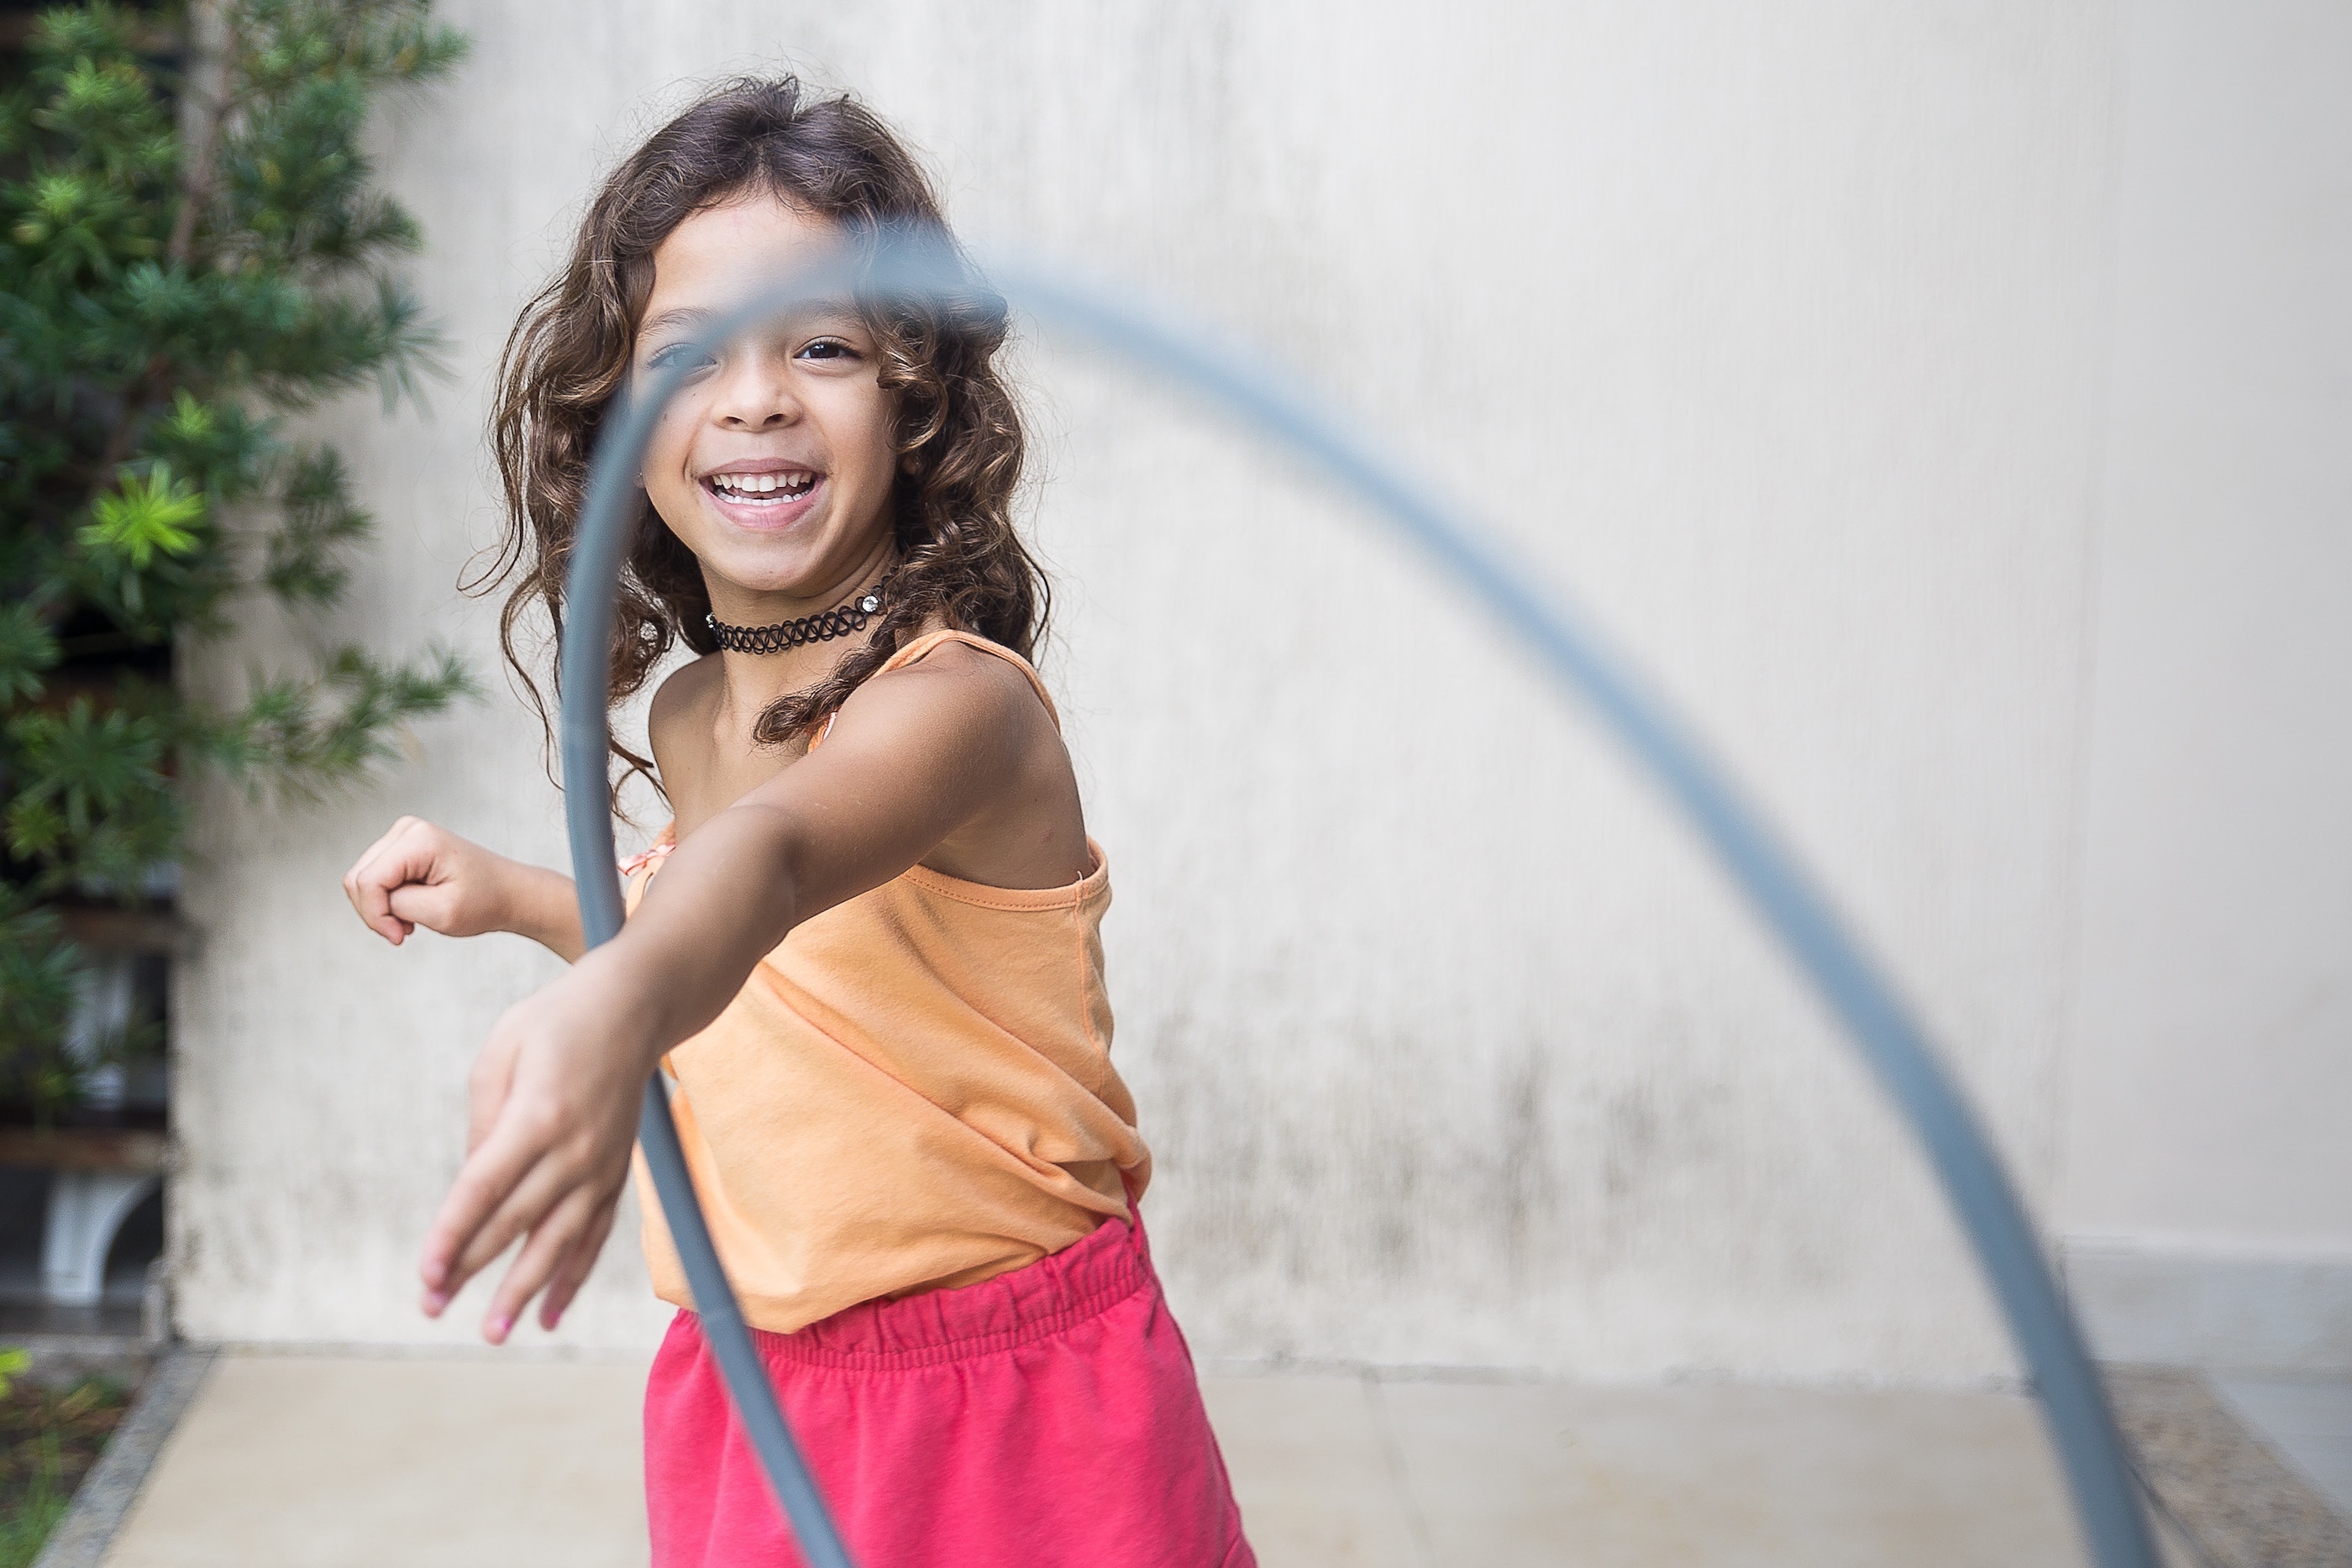 Girl in peach tank top and pink shorts tossing a hula hoop toward the camera.